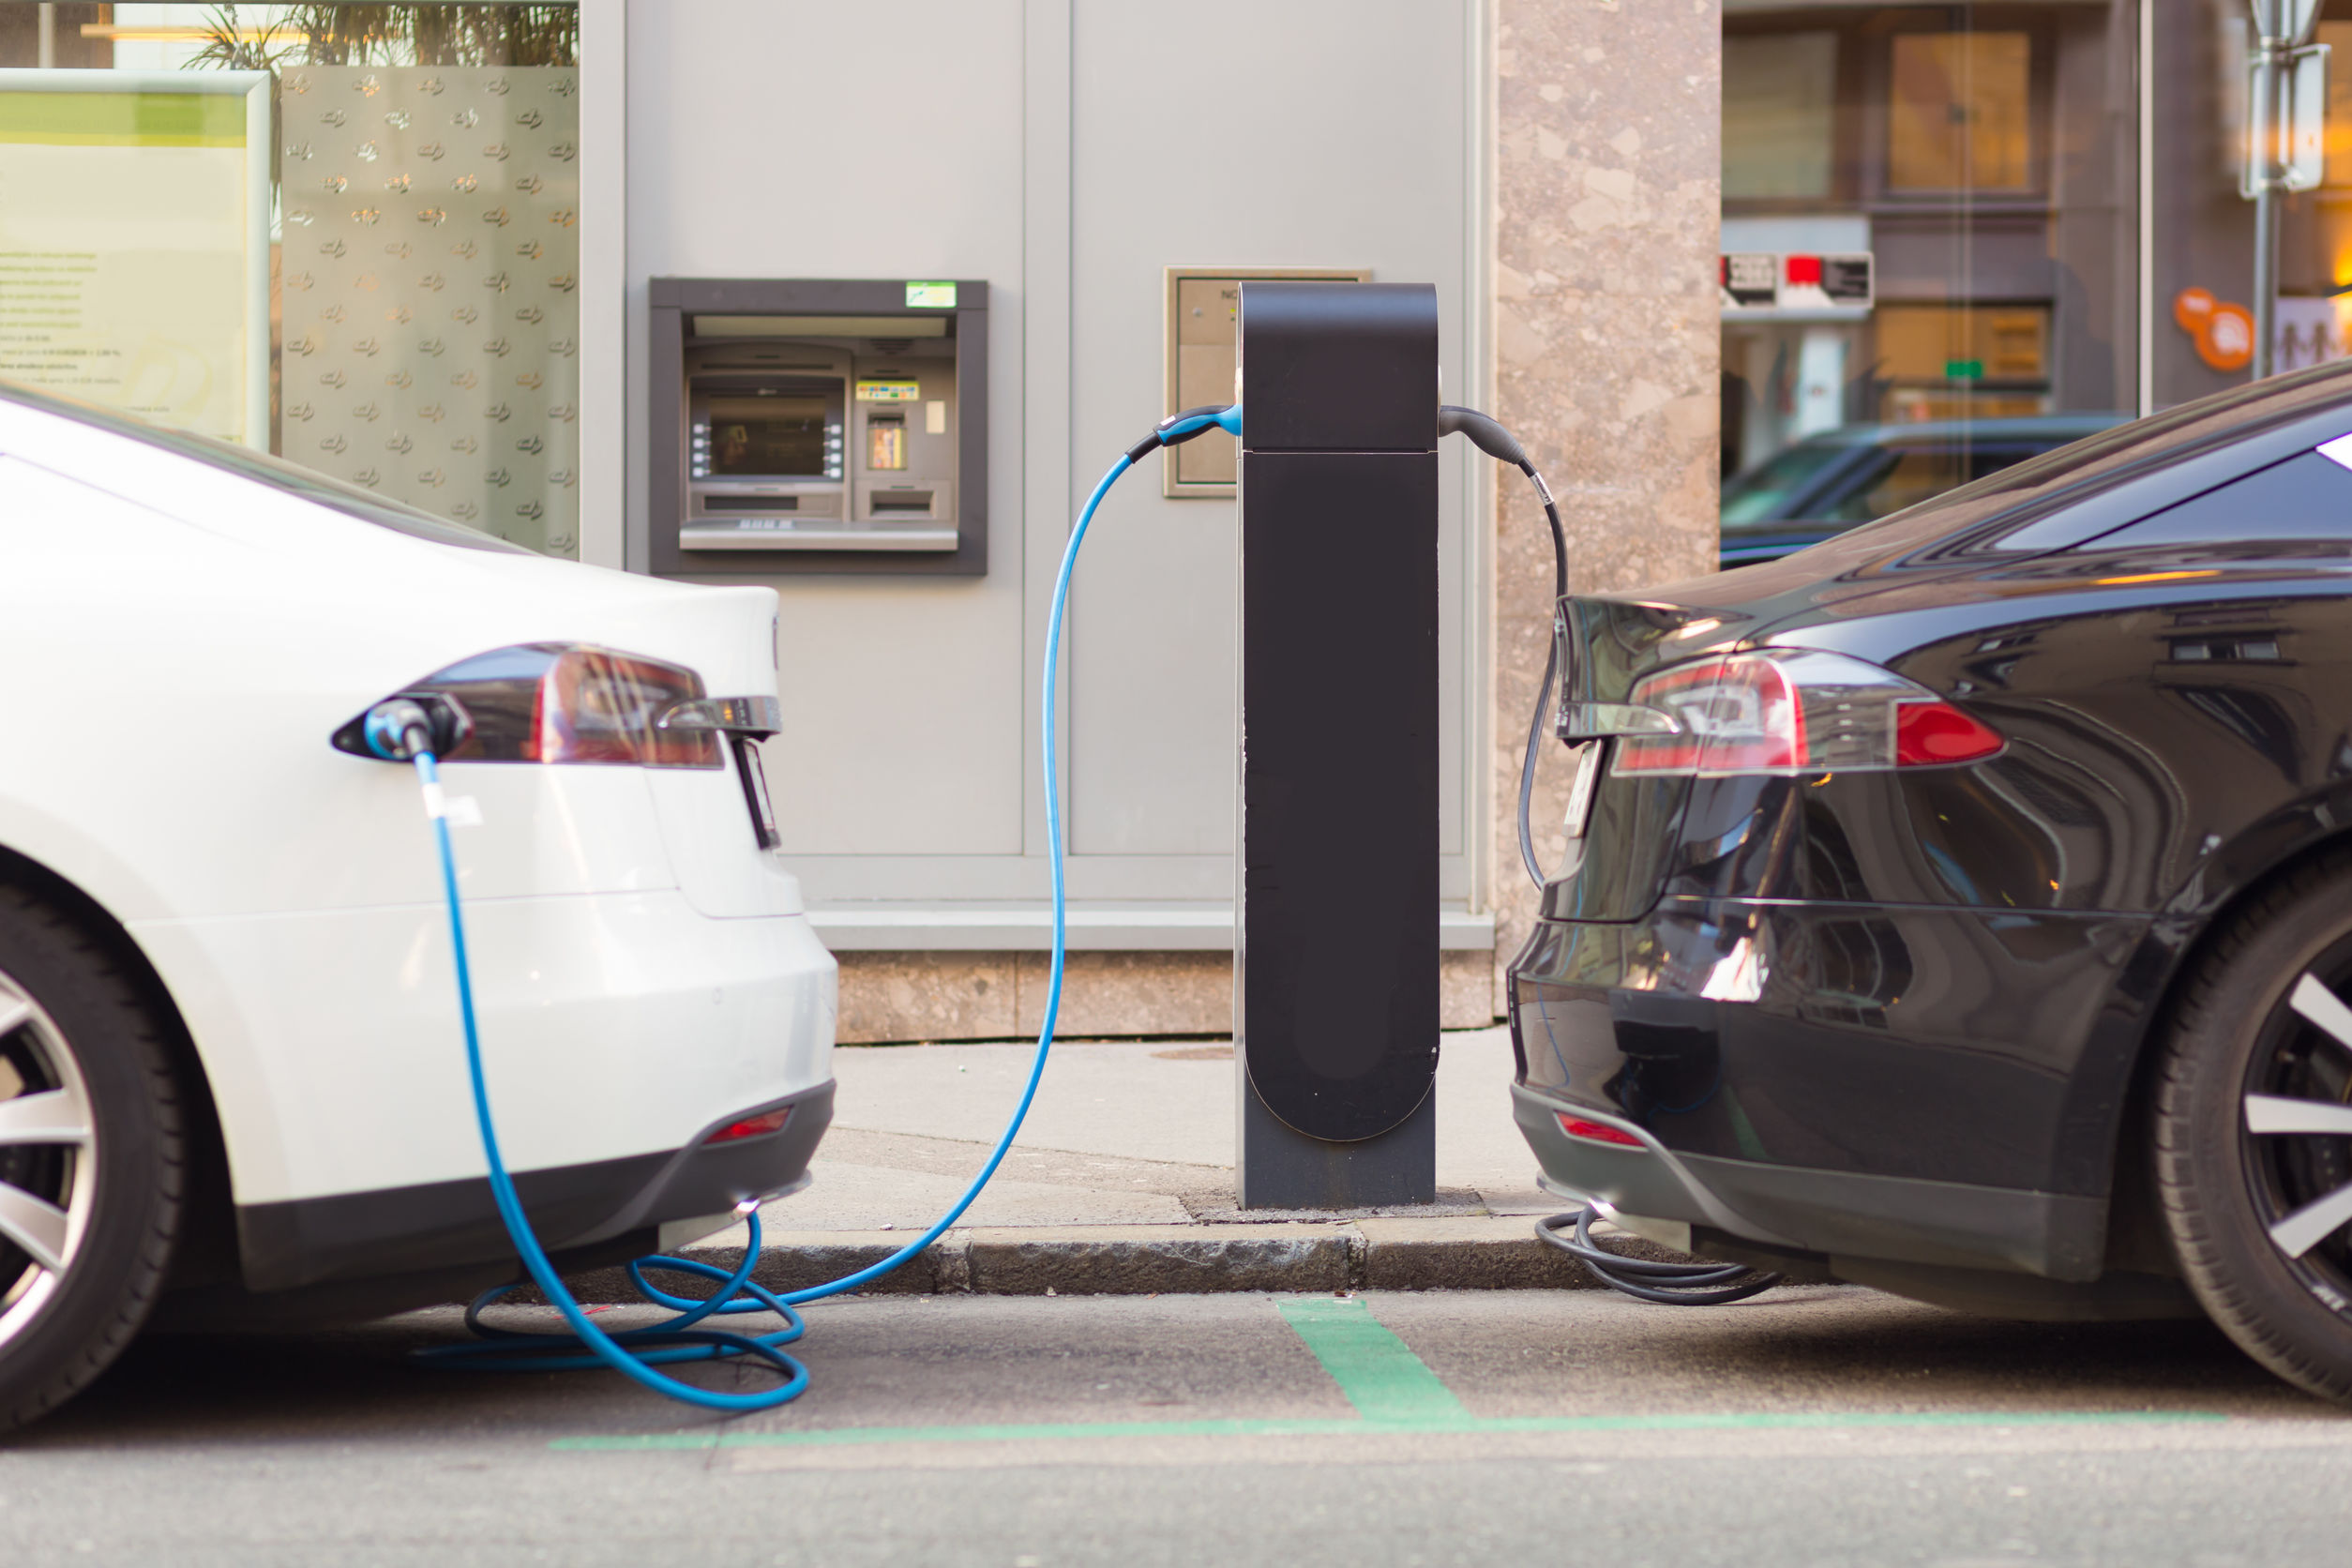 England: New homes to have electric car chargers by law